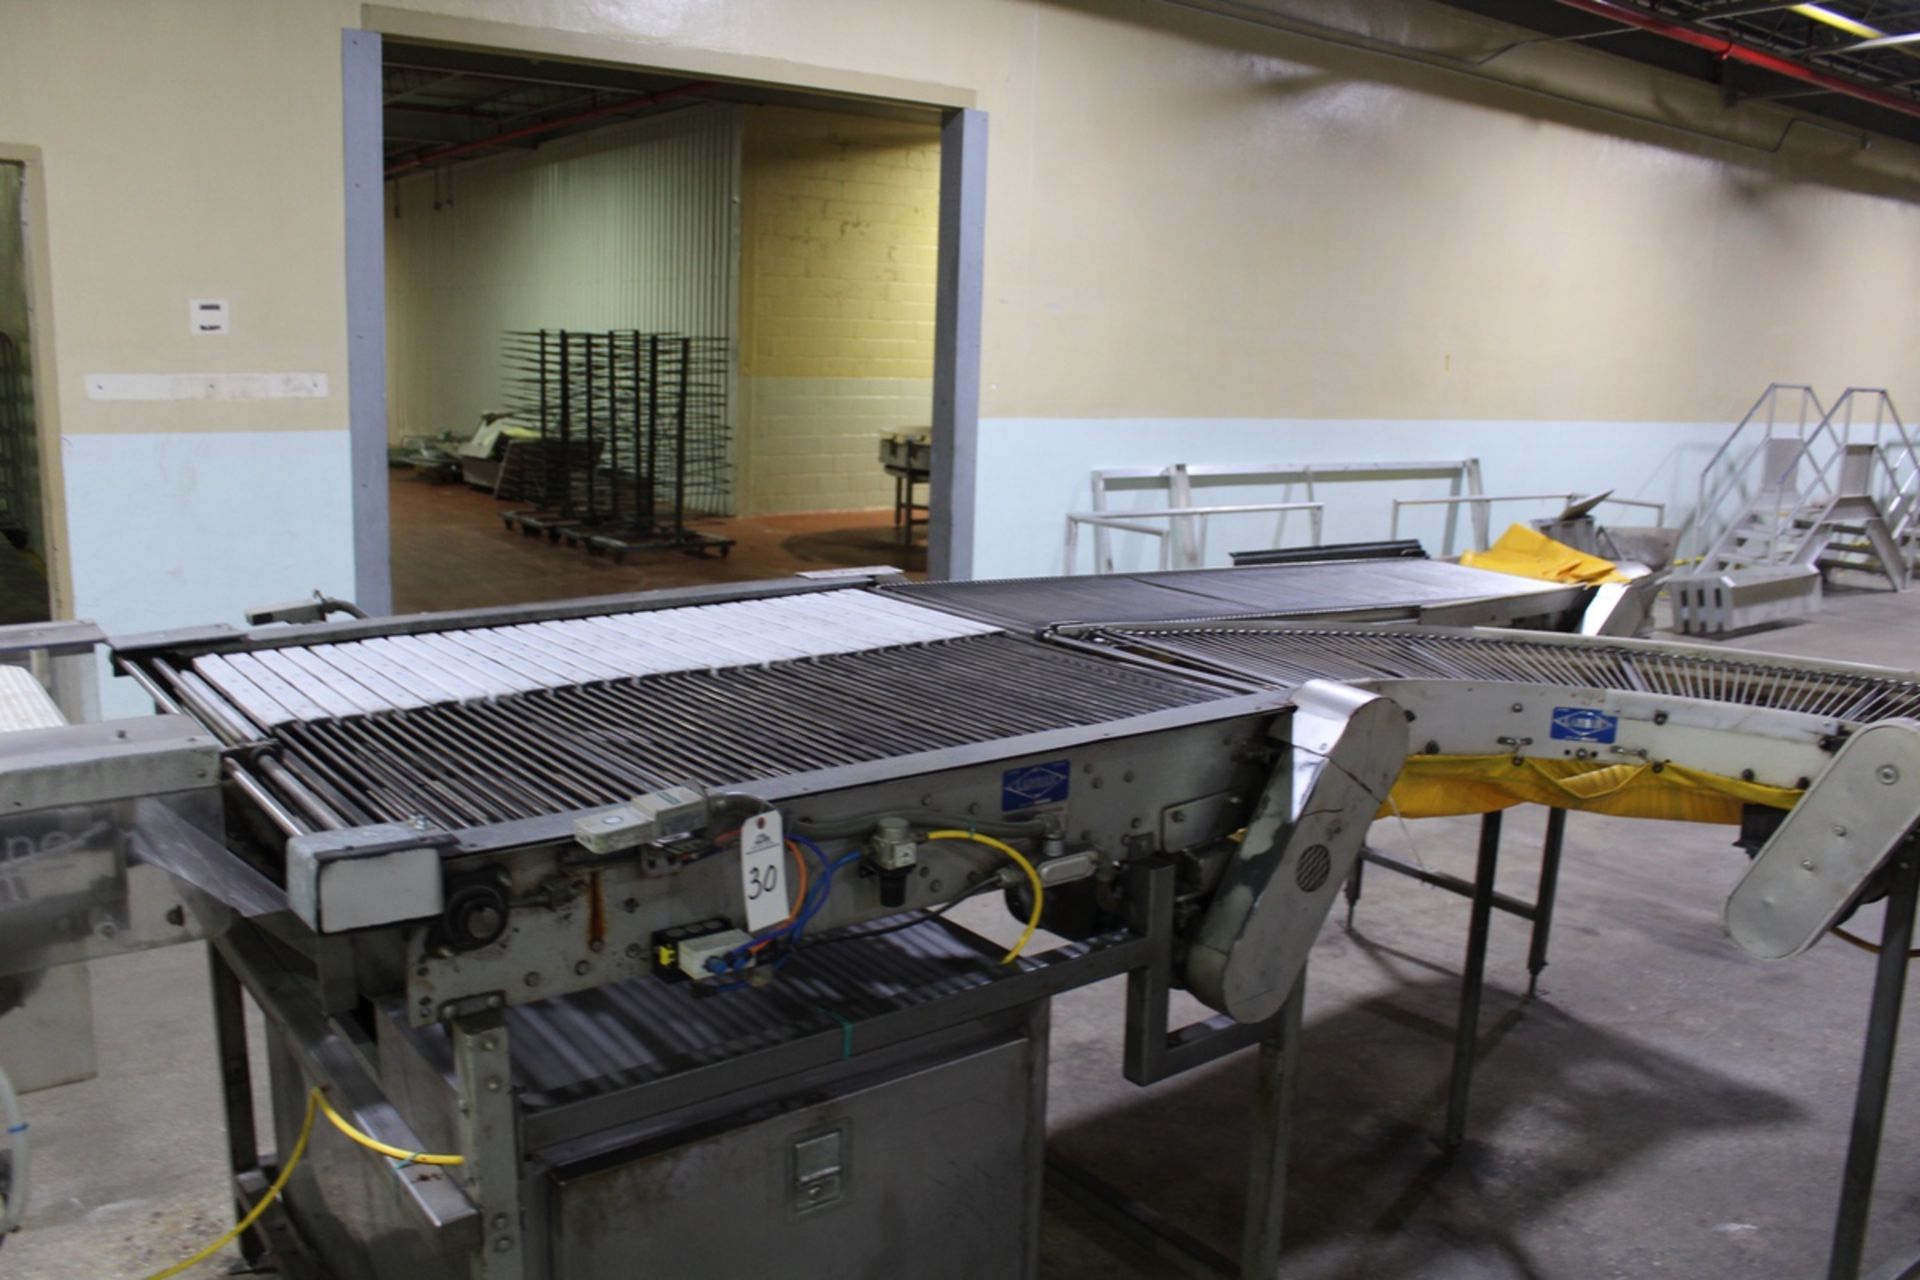 48" X 60" Lane Changer, W/ Discharge Conveyor Sections | Rig Fee $200